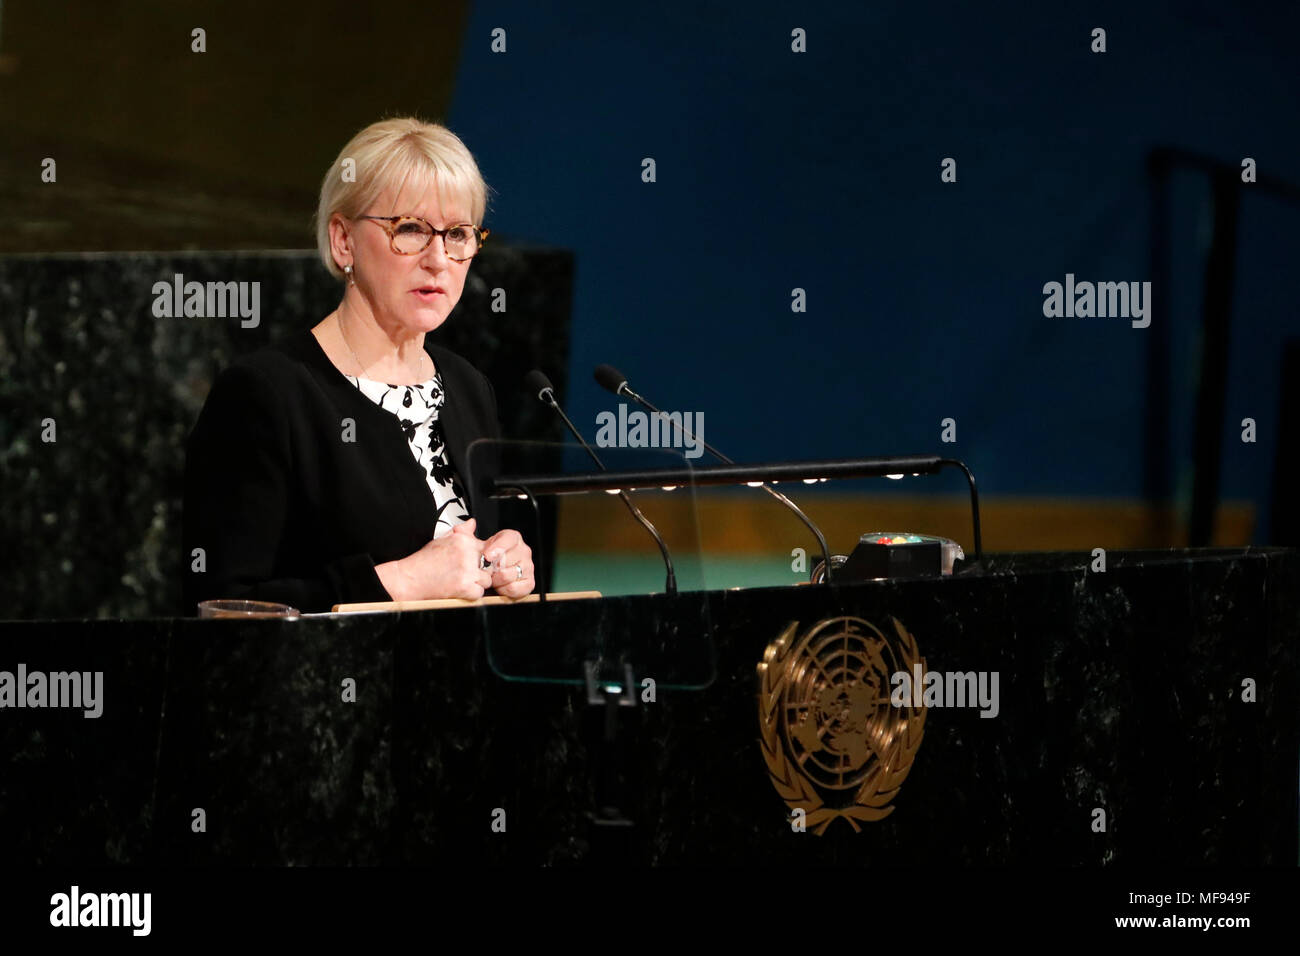 United Nations. 24th Apr, 2018. Swedish Foreign Minister Margot Wallstrom addresses the High-Level Meeting on Peacebuilding and Sustaining Peace at the UN headquarters in New York, April 24, 2018. UN General Assembly's High-Level Meeting on Peacebuilding and Sustaining Peace kicked here on Tuesday and is to run through Wednesday. Credit: Li Muzi/Xinhua/Alamy Live News Stock Photo